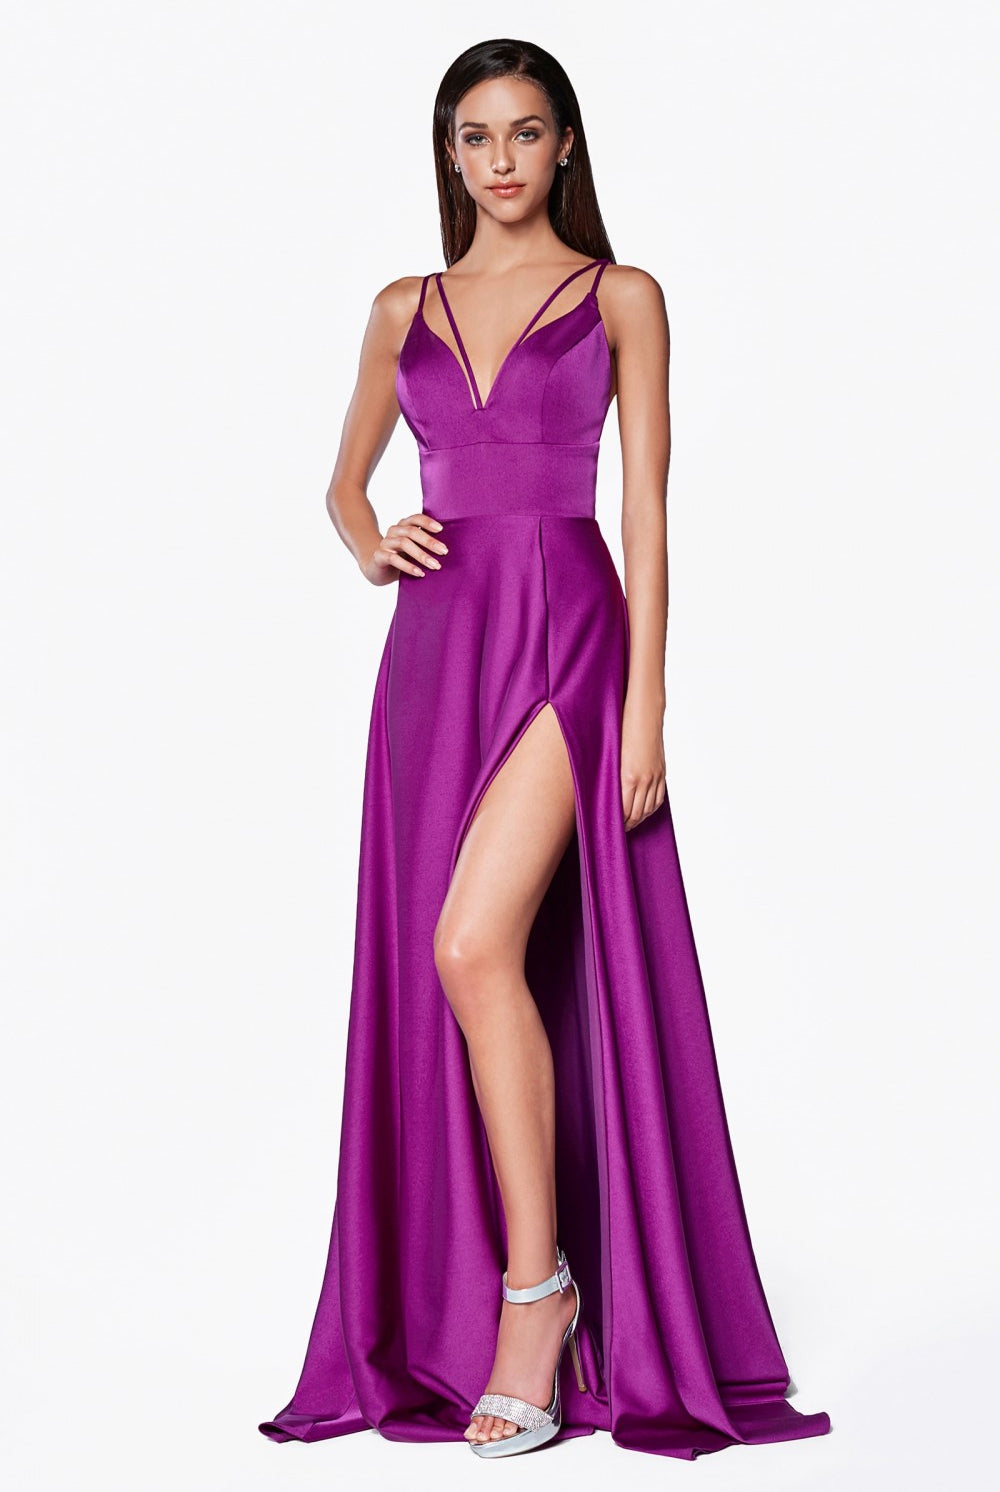 Double Criss Cross Straps Reckless High Leg Slit prom gown-smcdress